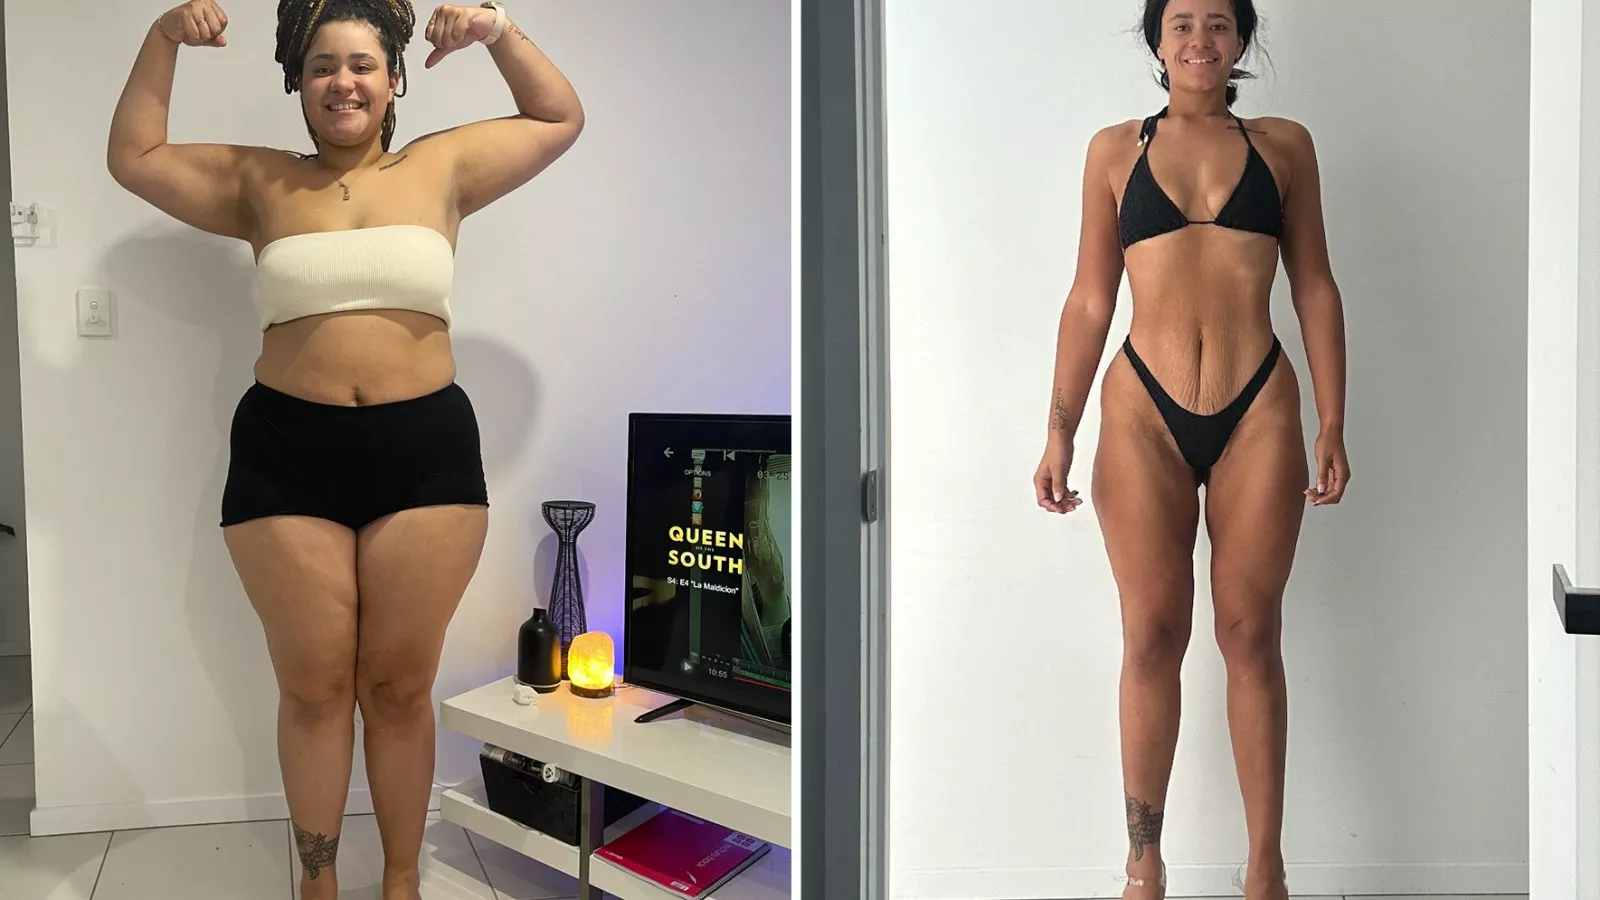 New Mom Drops 155 Pounds Thanks to One Lifestyle Change She Did